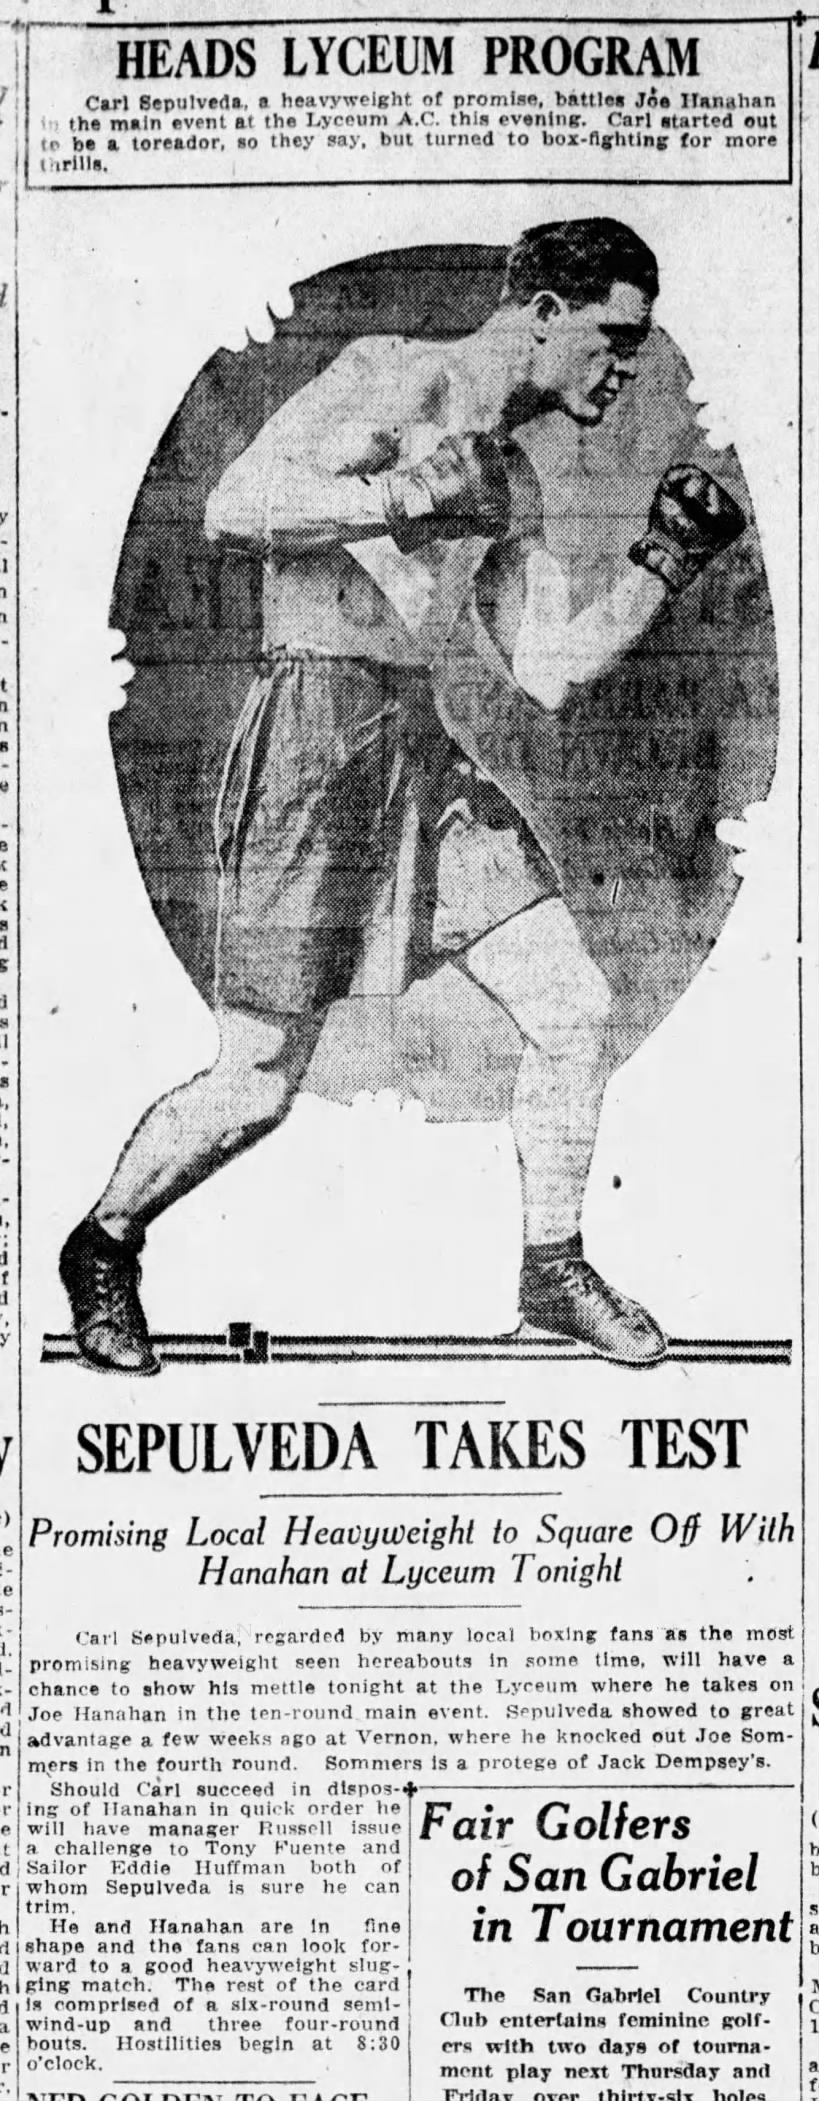 Photo and article on heavyweight boxer Carl Sepulveda.